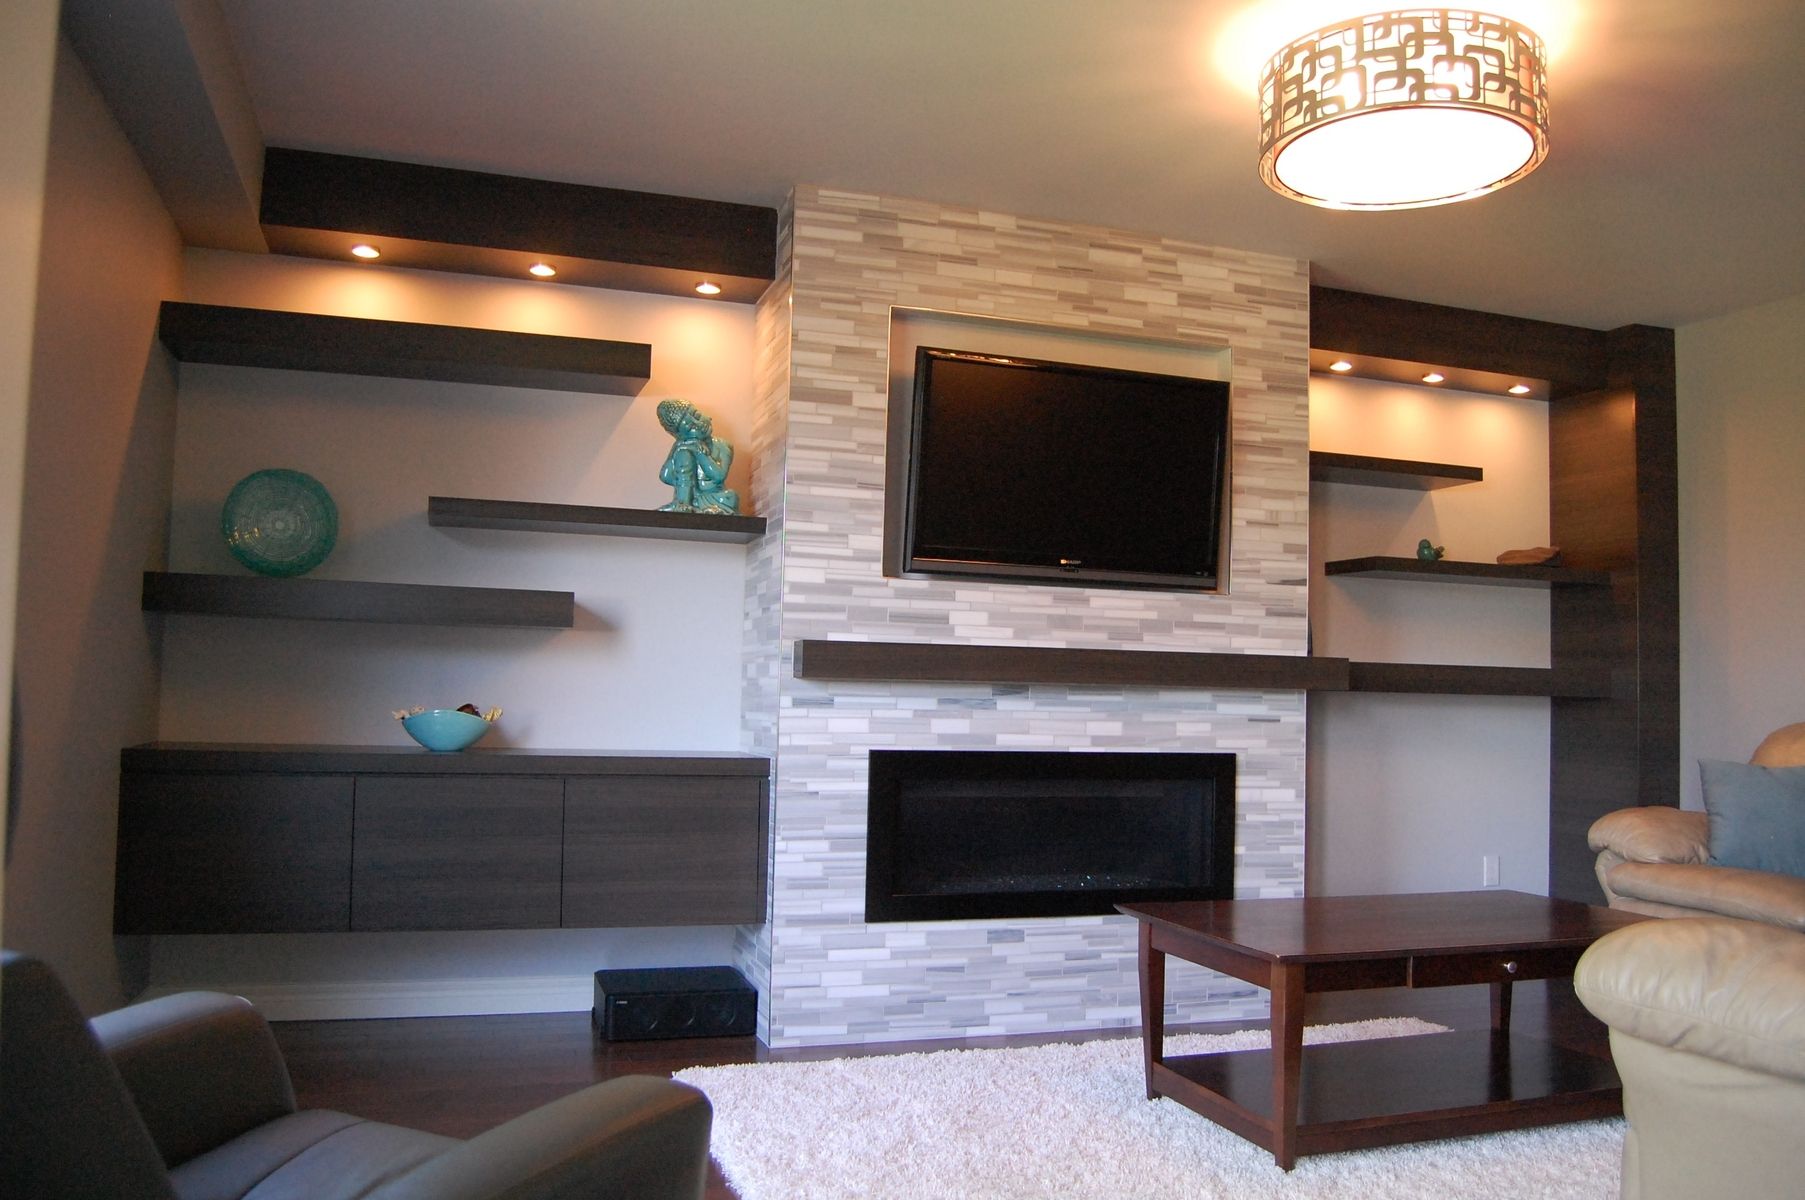 Tv Fireplace Wall New Custom Modern Wall Unit Made Pletely From A Printed